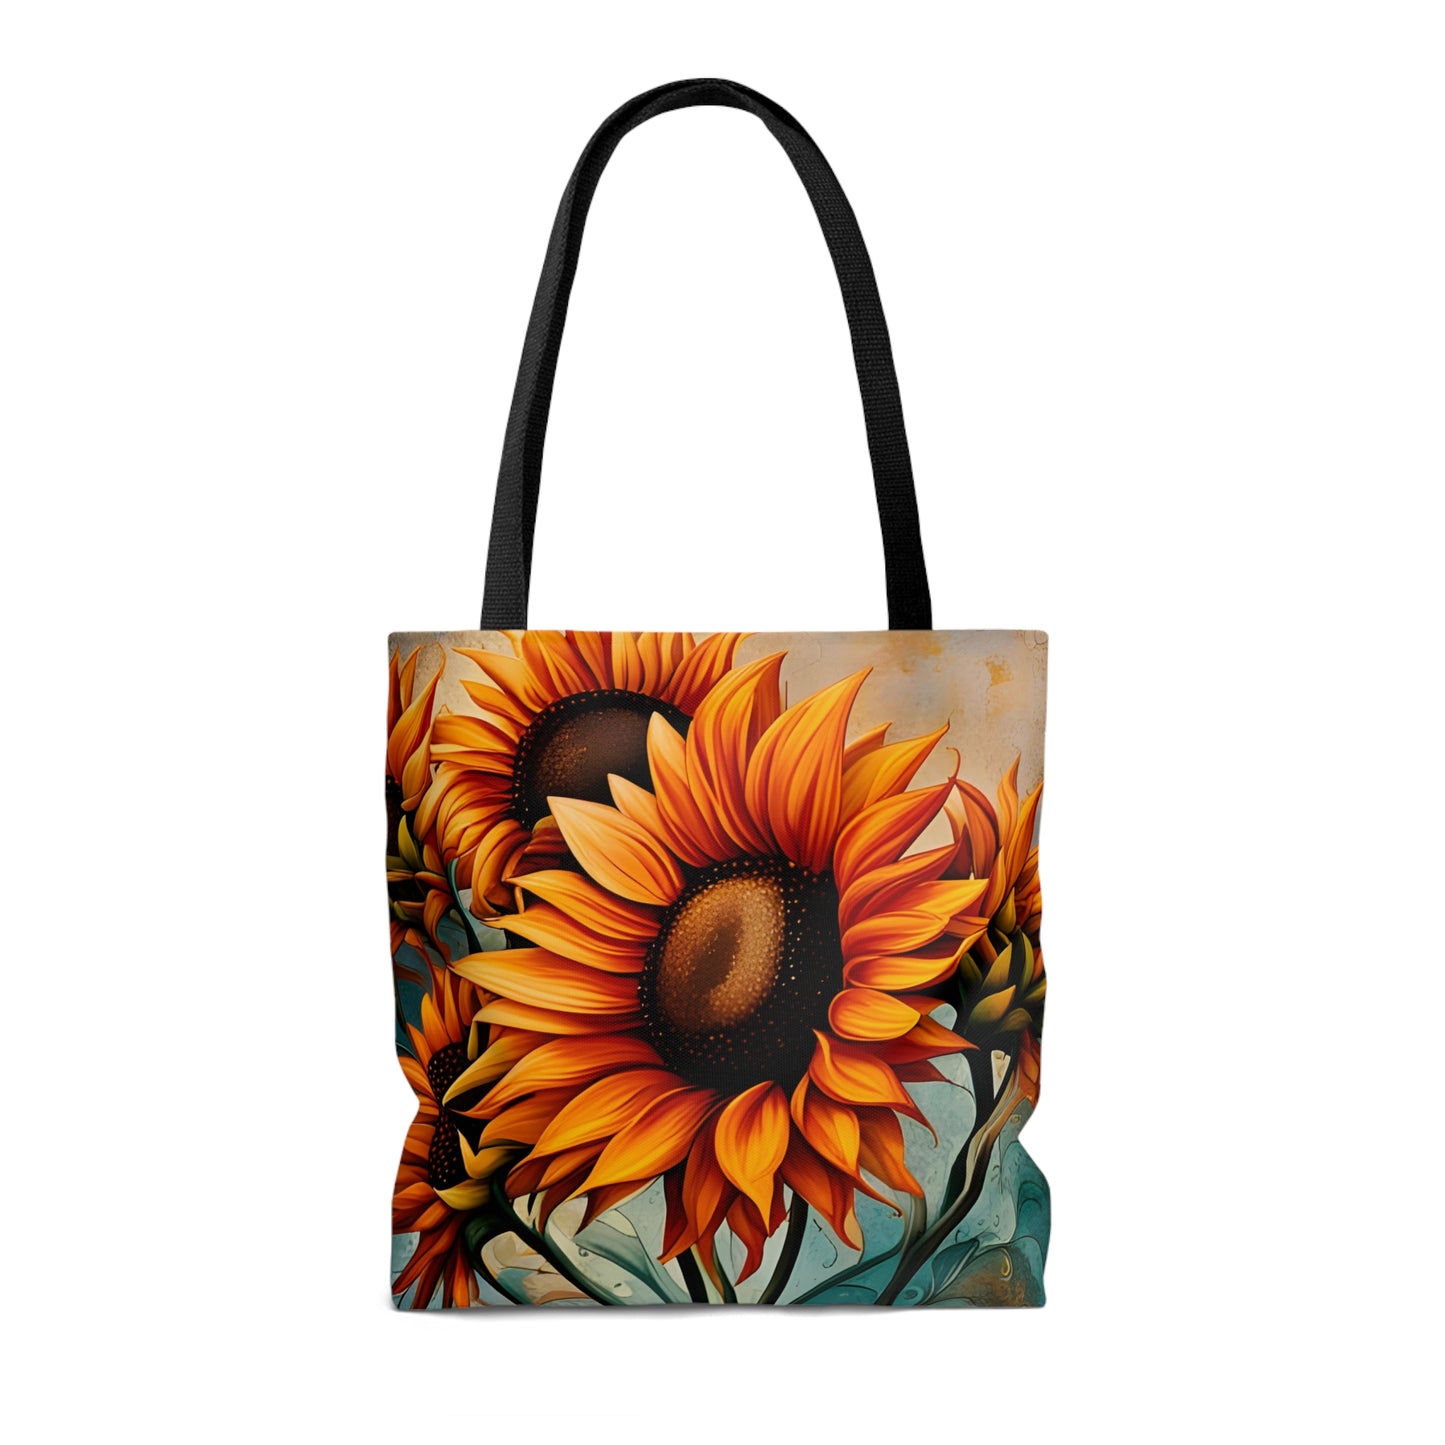 Sunflower Crop on Distressed Blue and Copper Background Printed on Tote Bag Front